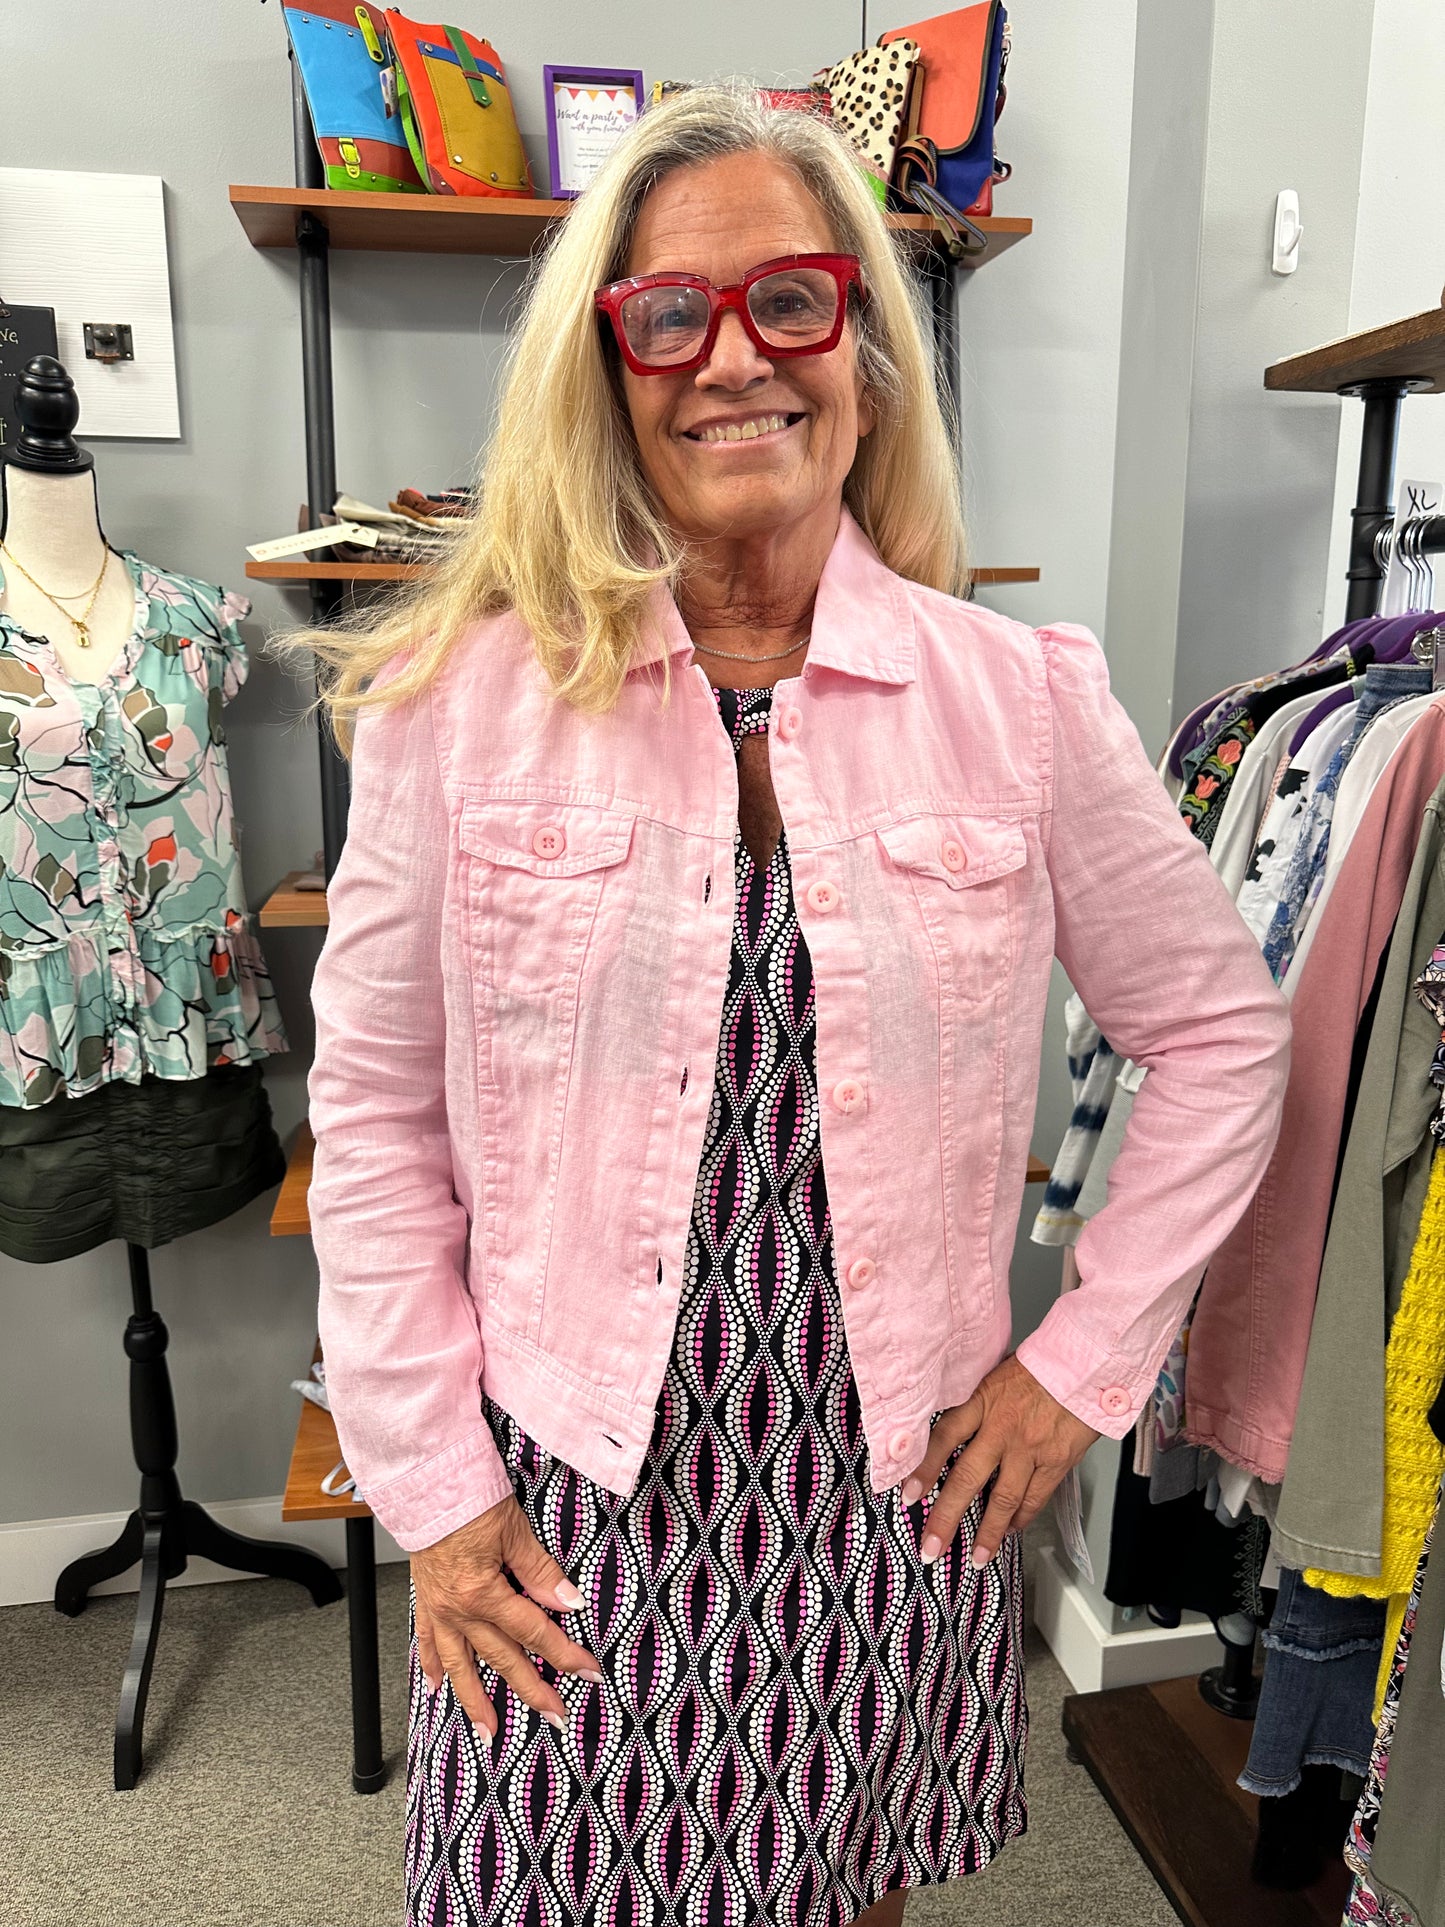 Another perfect lightweight button down jacket with front pockets, button at the sleeve and a small puff on the shoulder. A durable linen jacket thats fun, colorful and goes with anything in your wardrobe. It also moves with your body and if it gets wrinkled it still looks great.